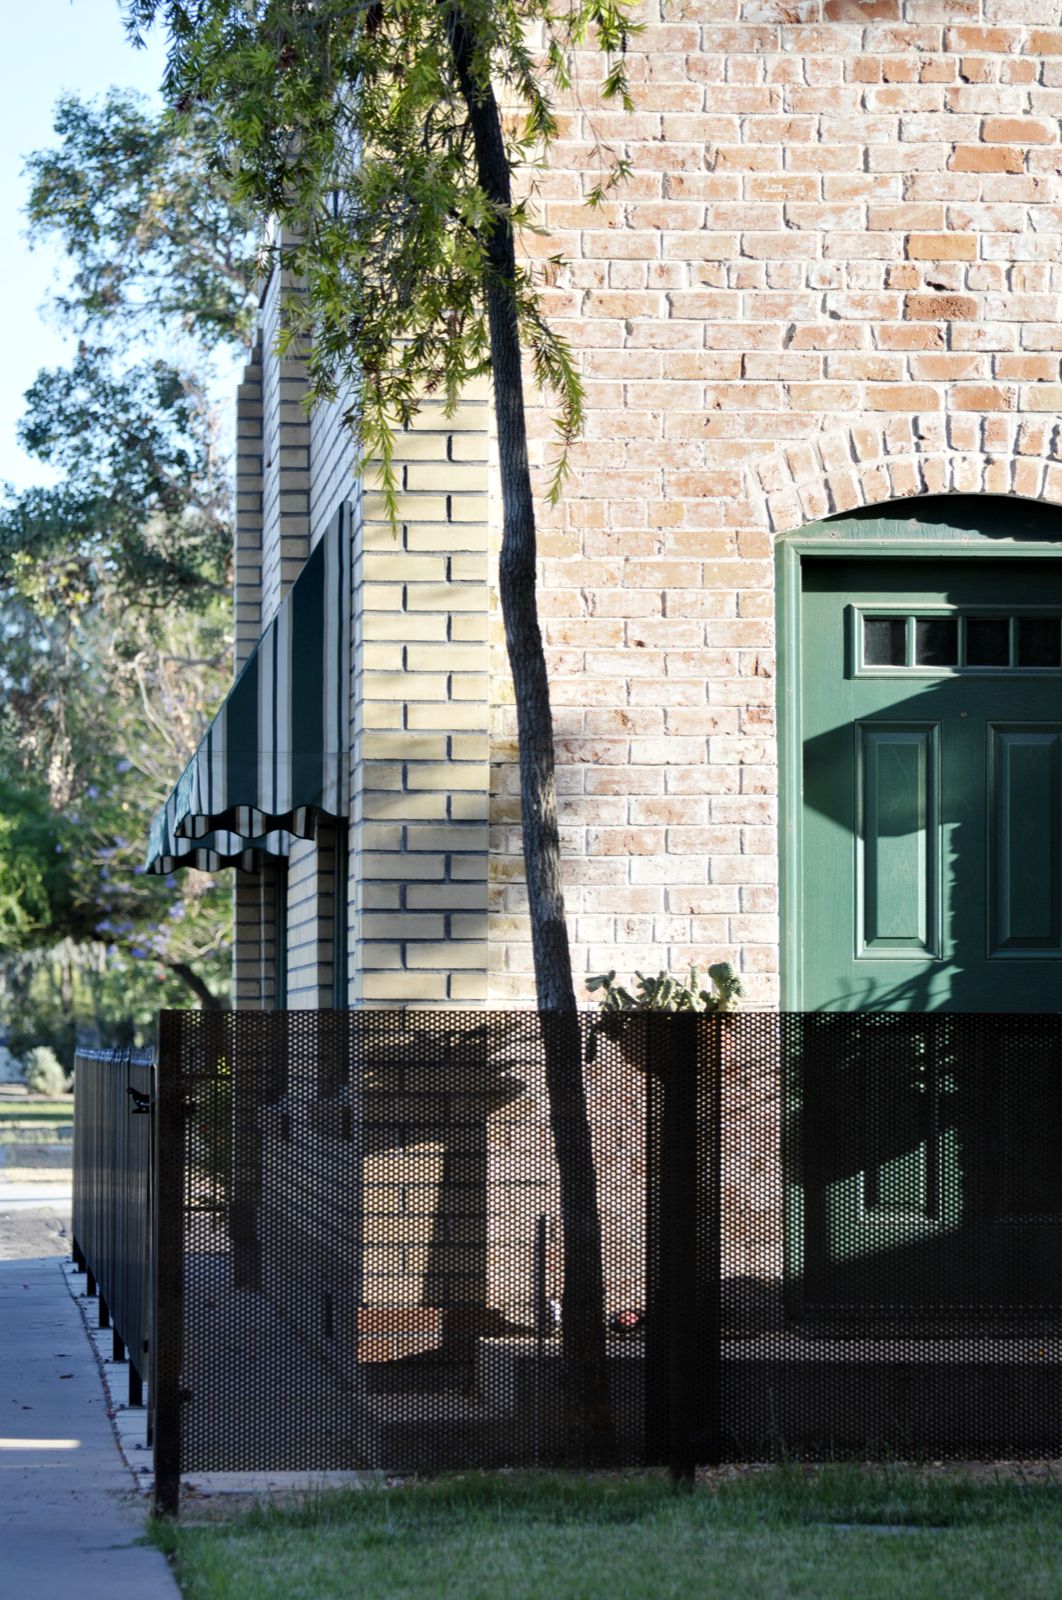 Fence detail of perforated steel sheet in the foreground and historic brick wall house with green-white shade canopies in the background